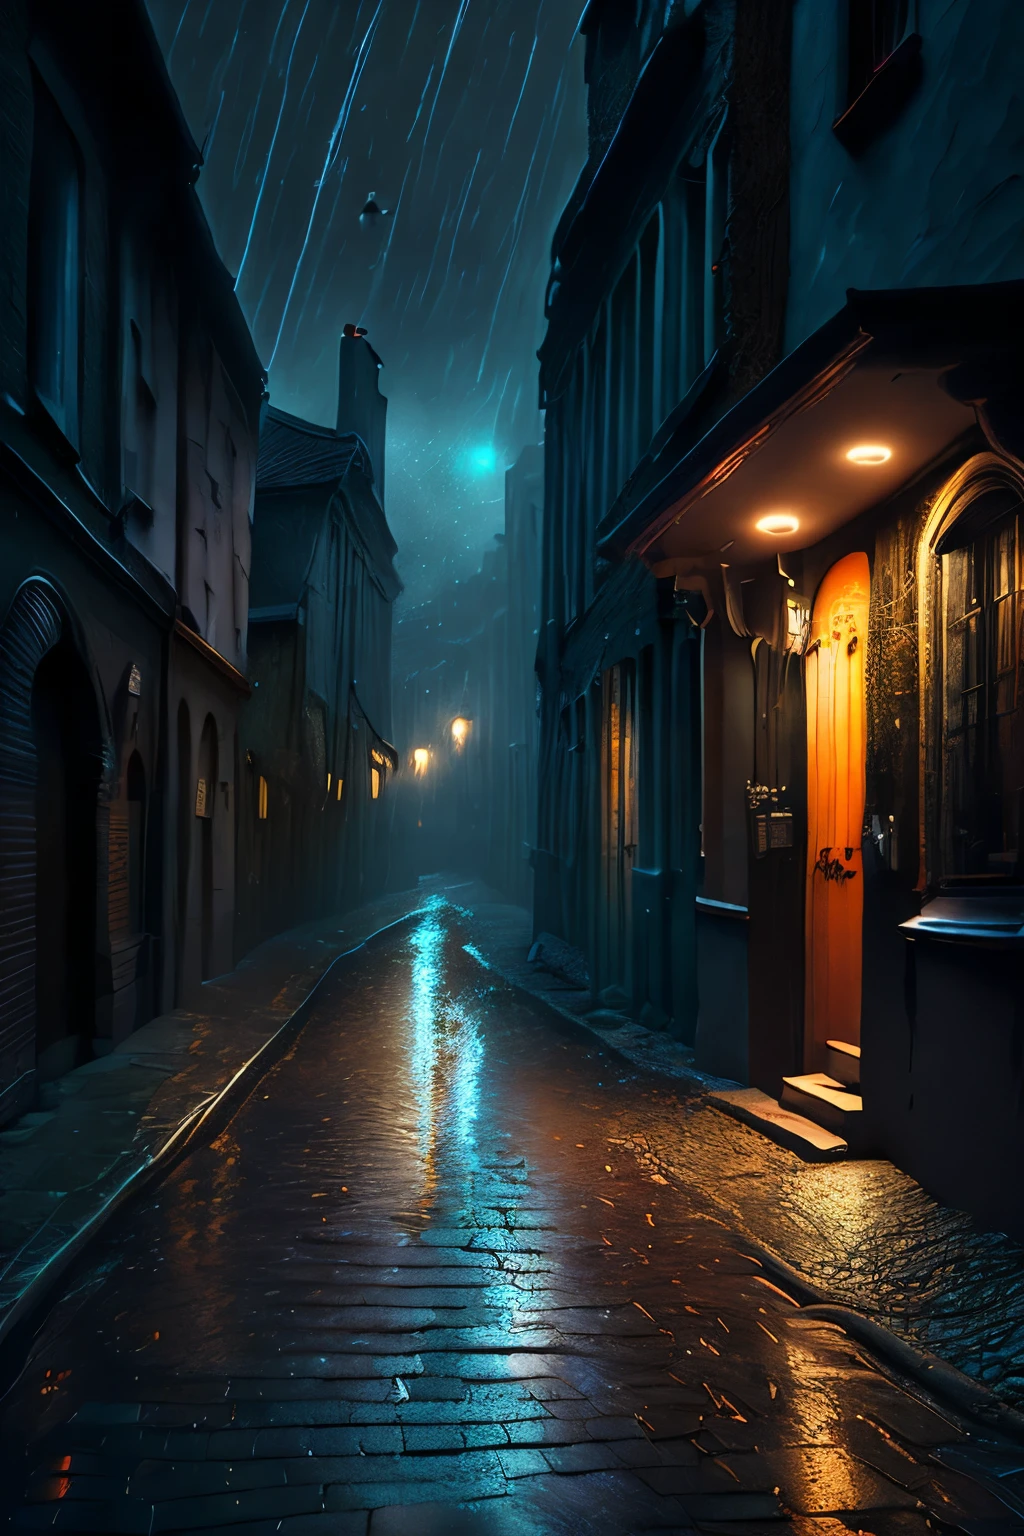 A dark alley on a gloomy,  and mysterious night, a floor made of wet cobblestones, with gutters running accumulated rainwater, a slightly torrential rain, someone with a hooded case distancing himself with steps of escape from something that is lurking around him, intricate, realistic, a blurred image of escape movements, nebulous and mucusy and twisted tentacles appearing in the corners of the mysterious street.